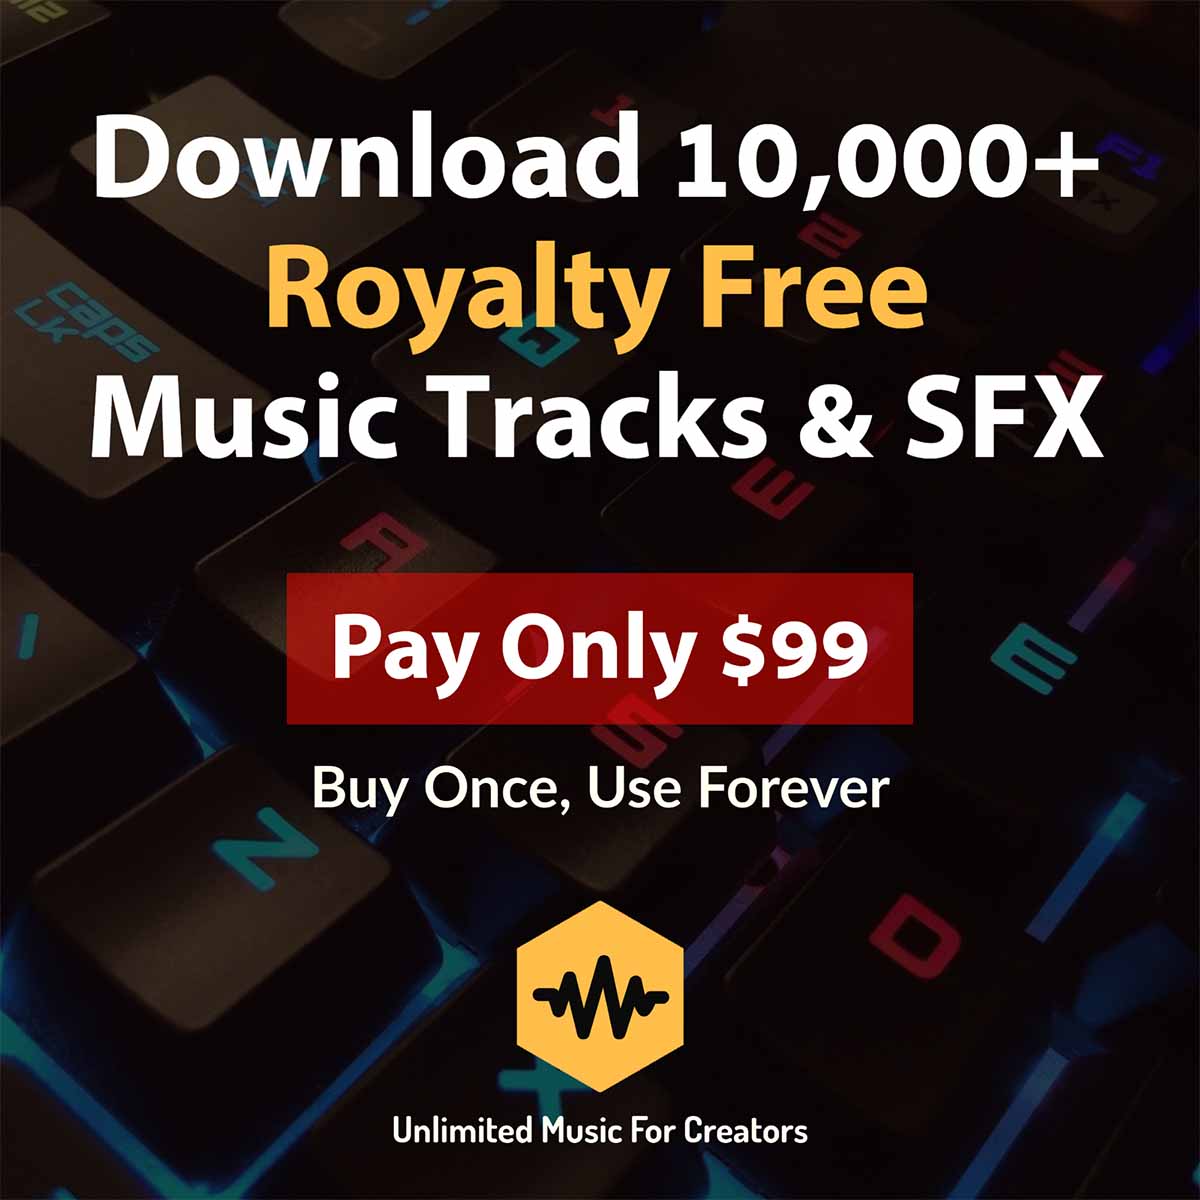 ROYALTY FREE EDITION: Cinematic Music for Film, TV, Apps, Video